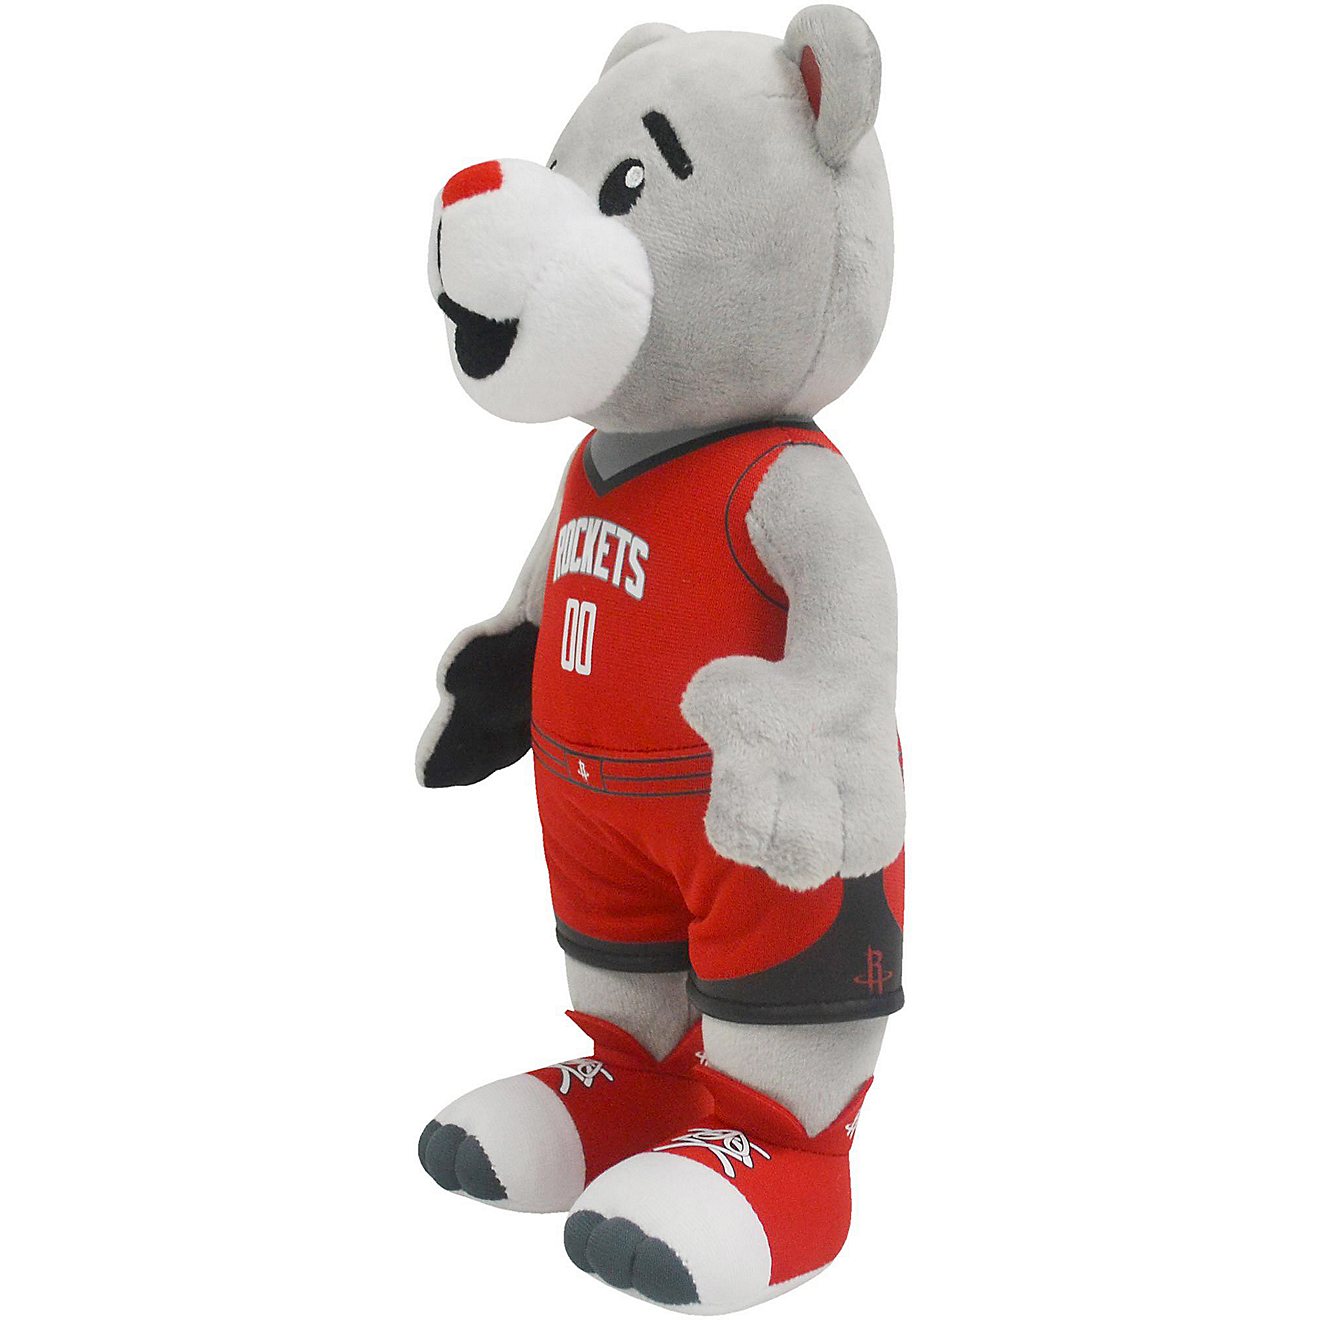 Bleacher Creatures Houston Rockets Clutch 10 Plush Figure A Mascot for Play or Display